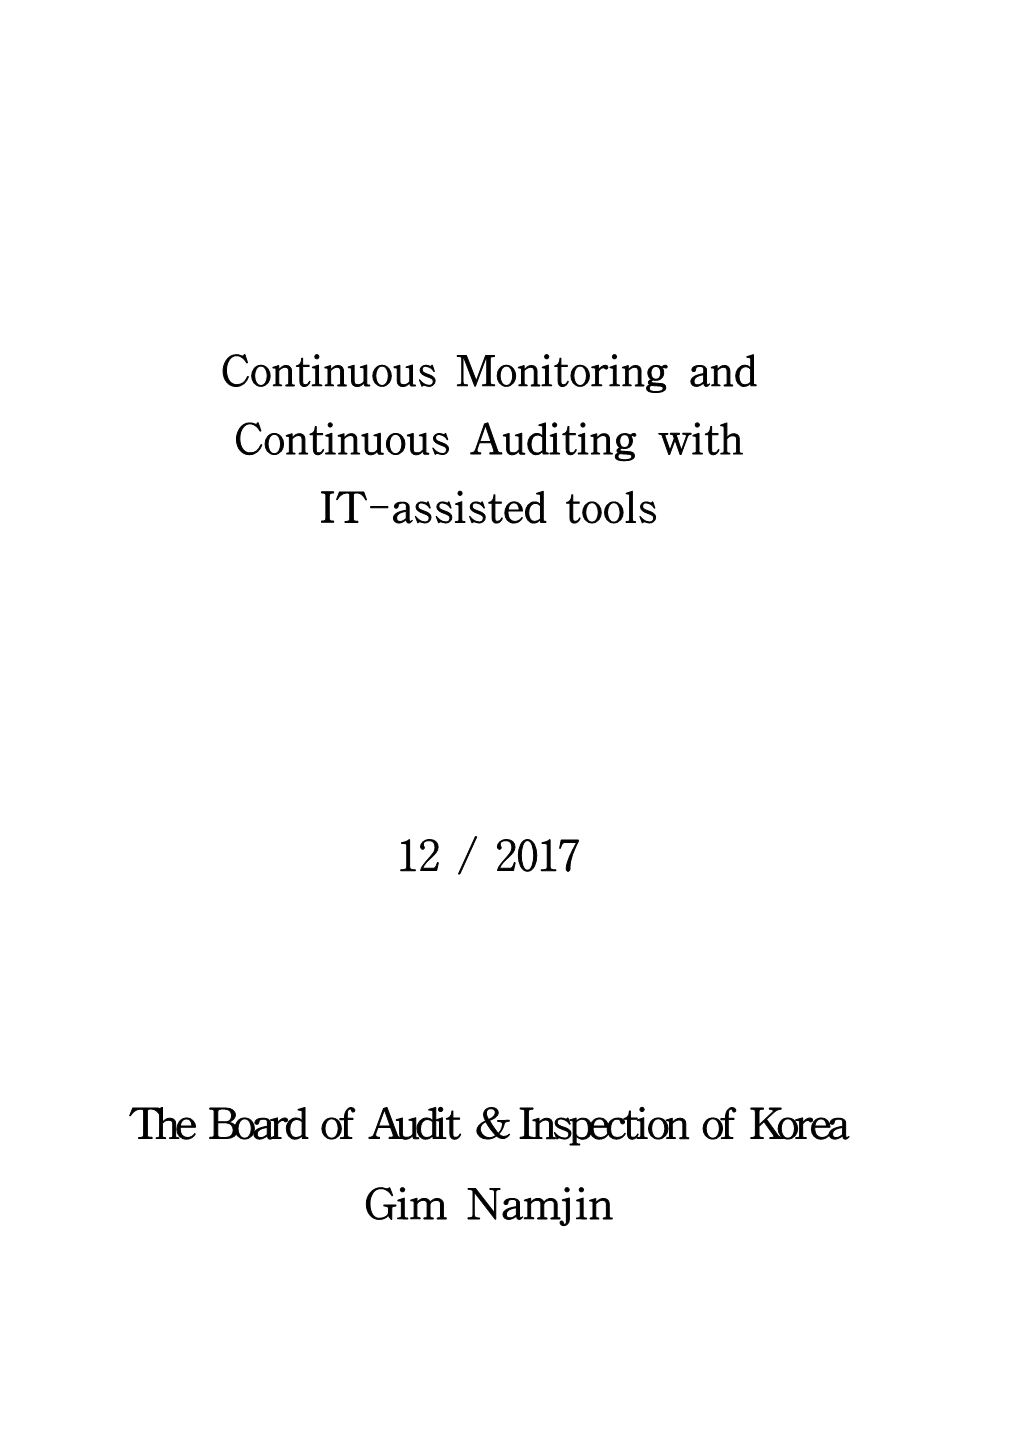 Continuous Monitoring and Continuous Auditing with IT-Assisted Tools 12 / 2017 the Board of Audit & Inspection of Korea